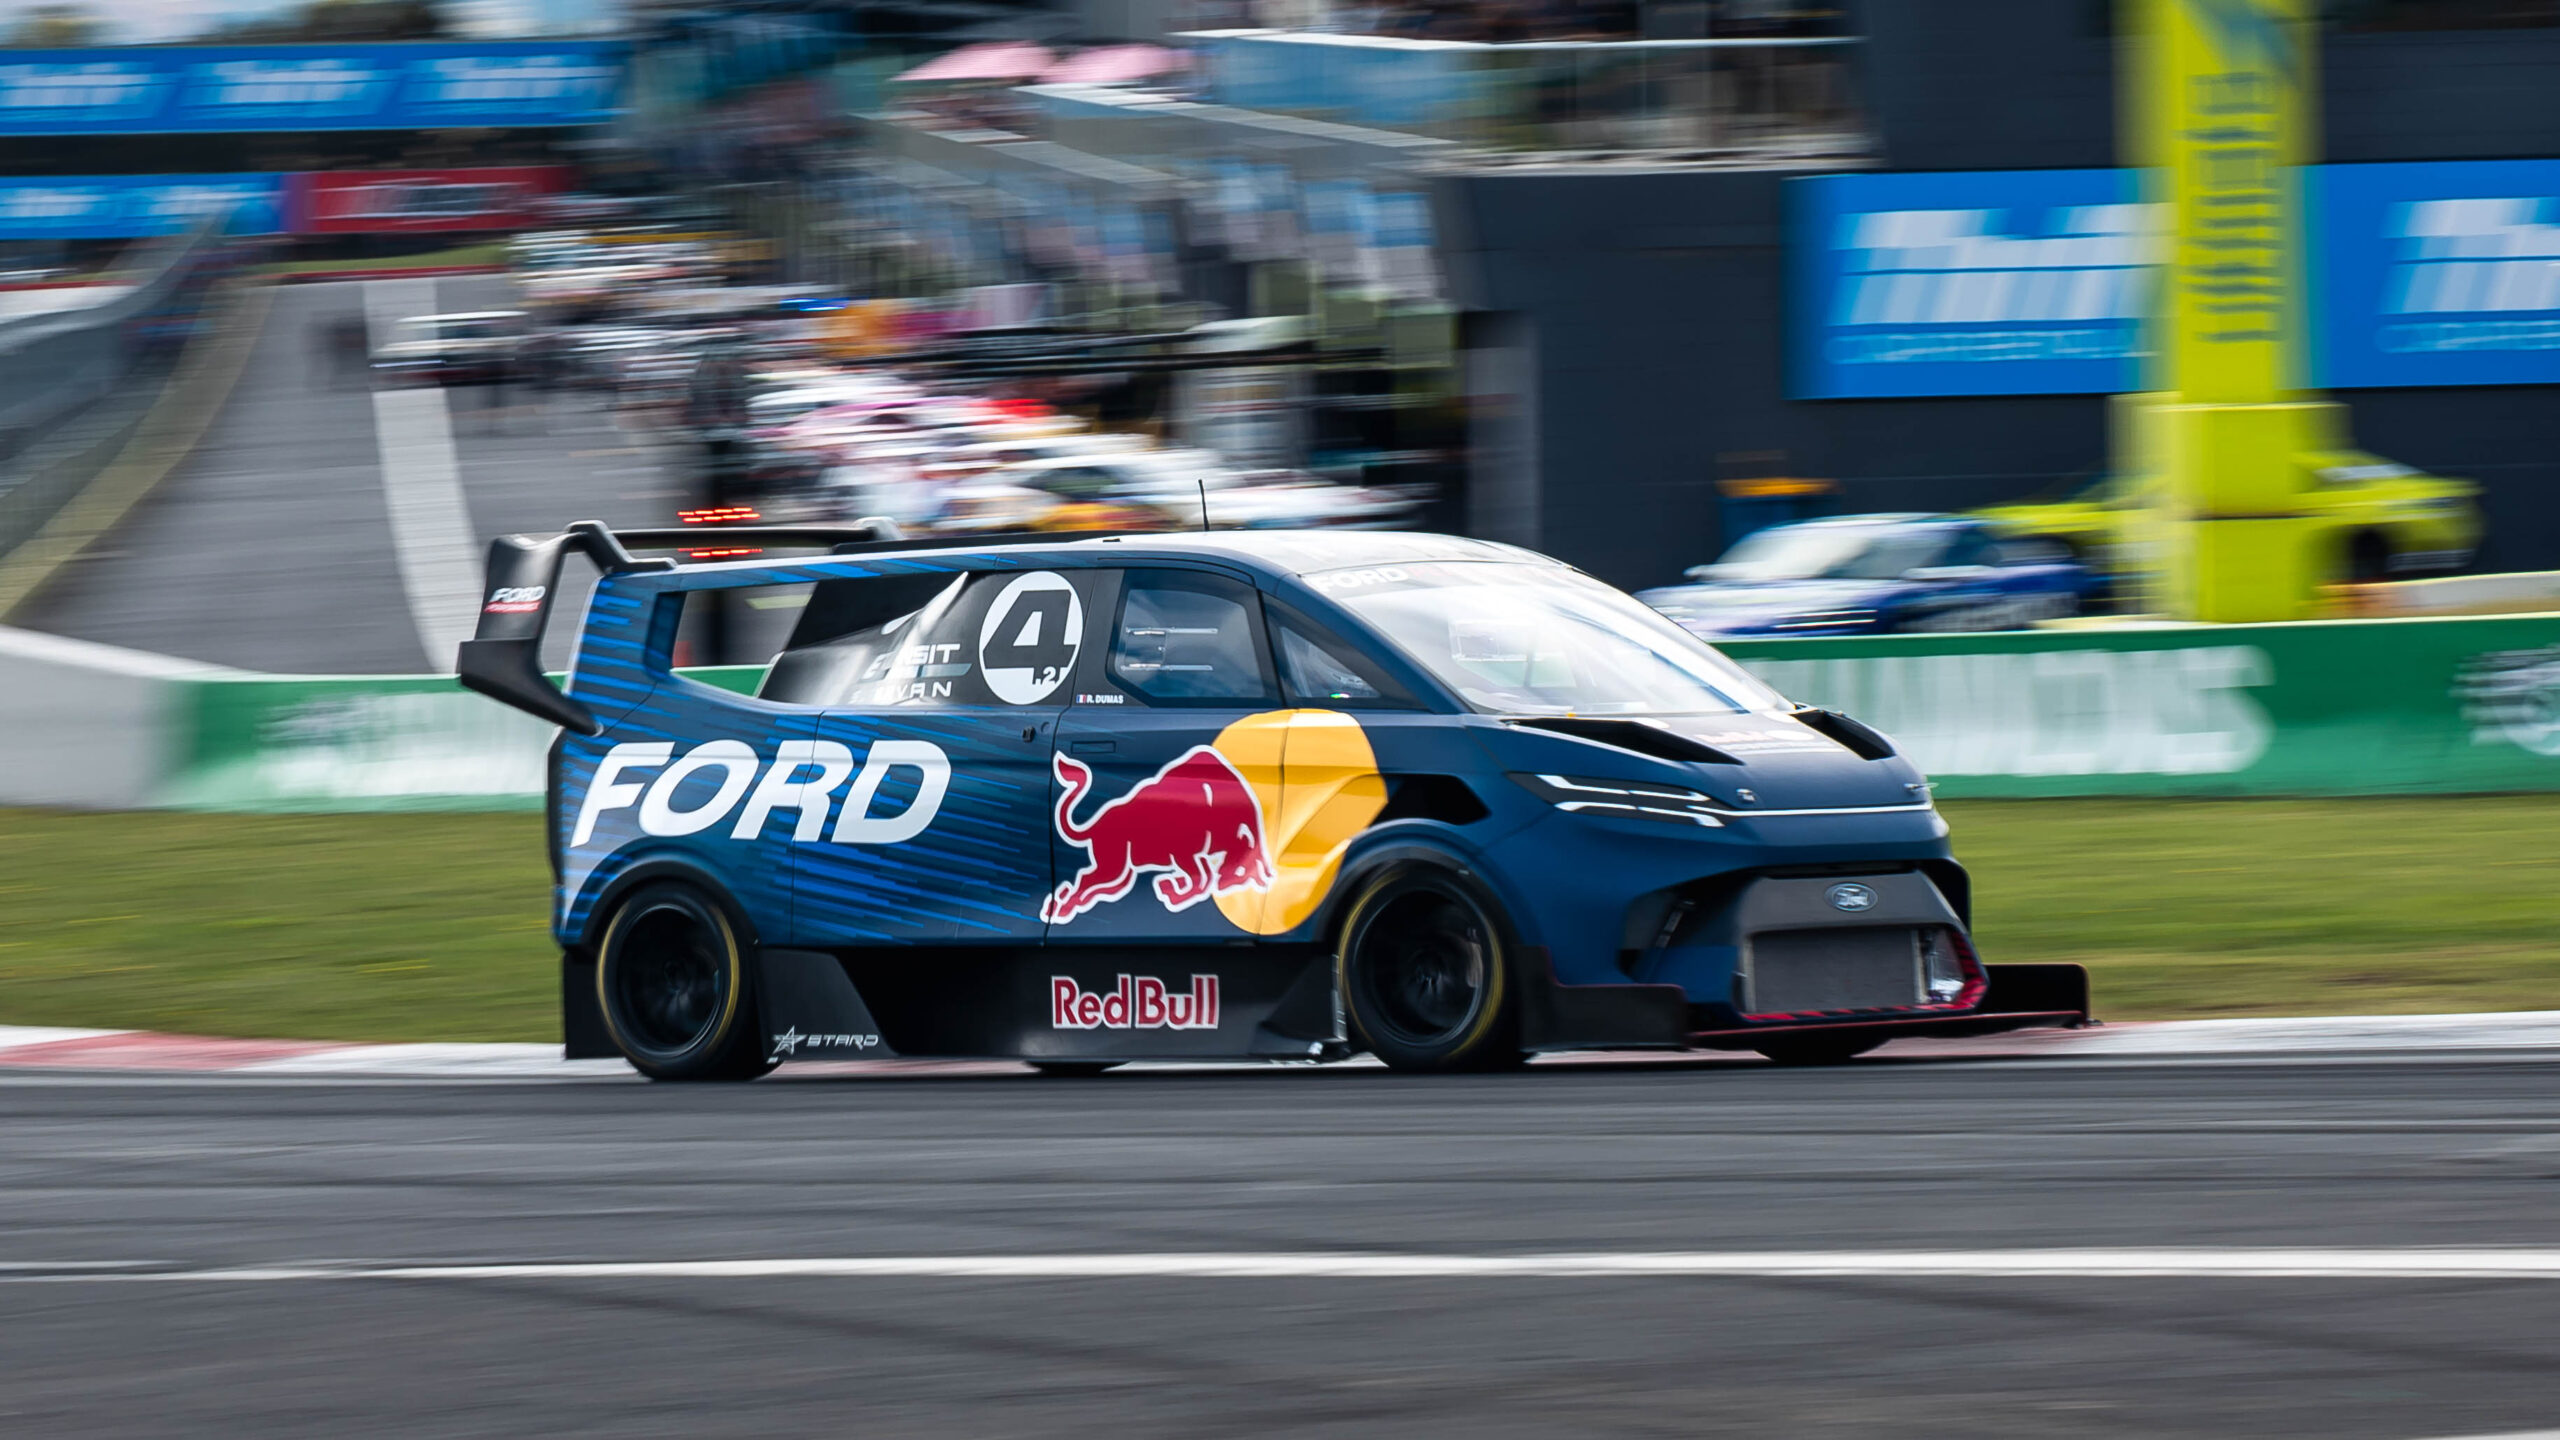 The Ford SuperVan has surpassed the speed record previously held by the Mercedes-AMG GT3.